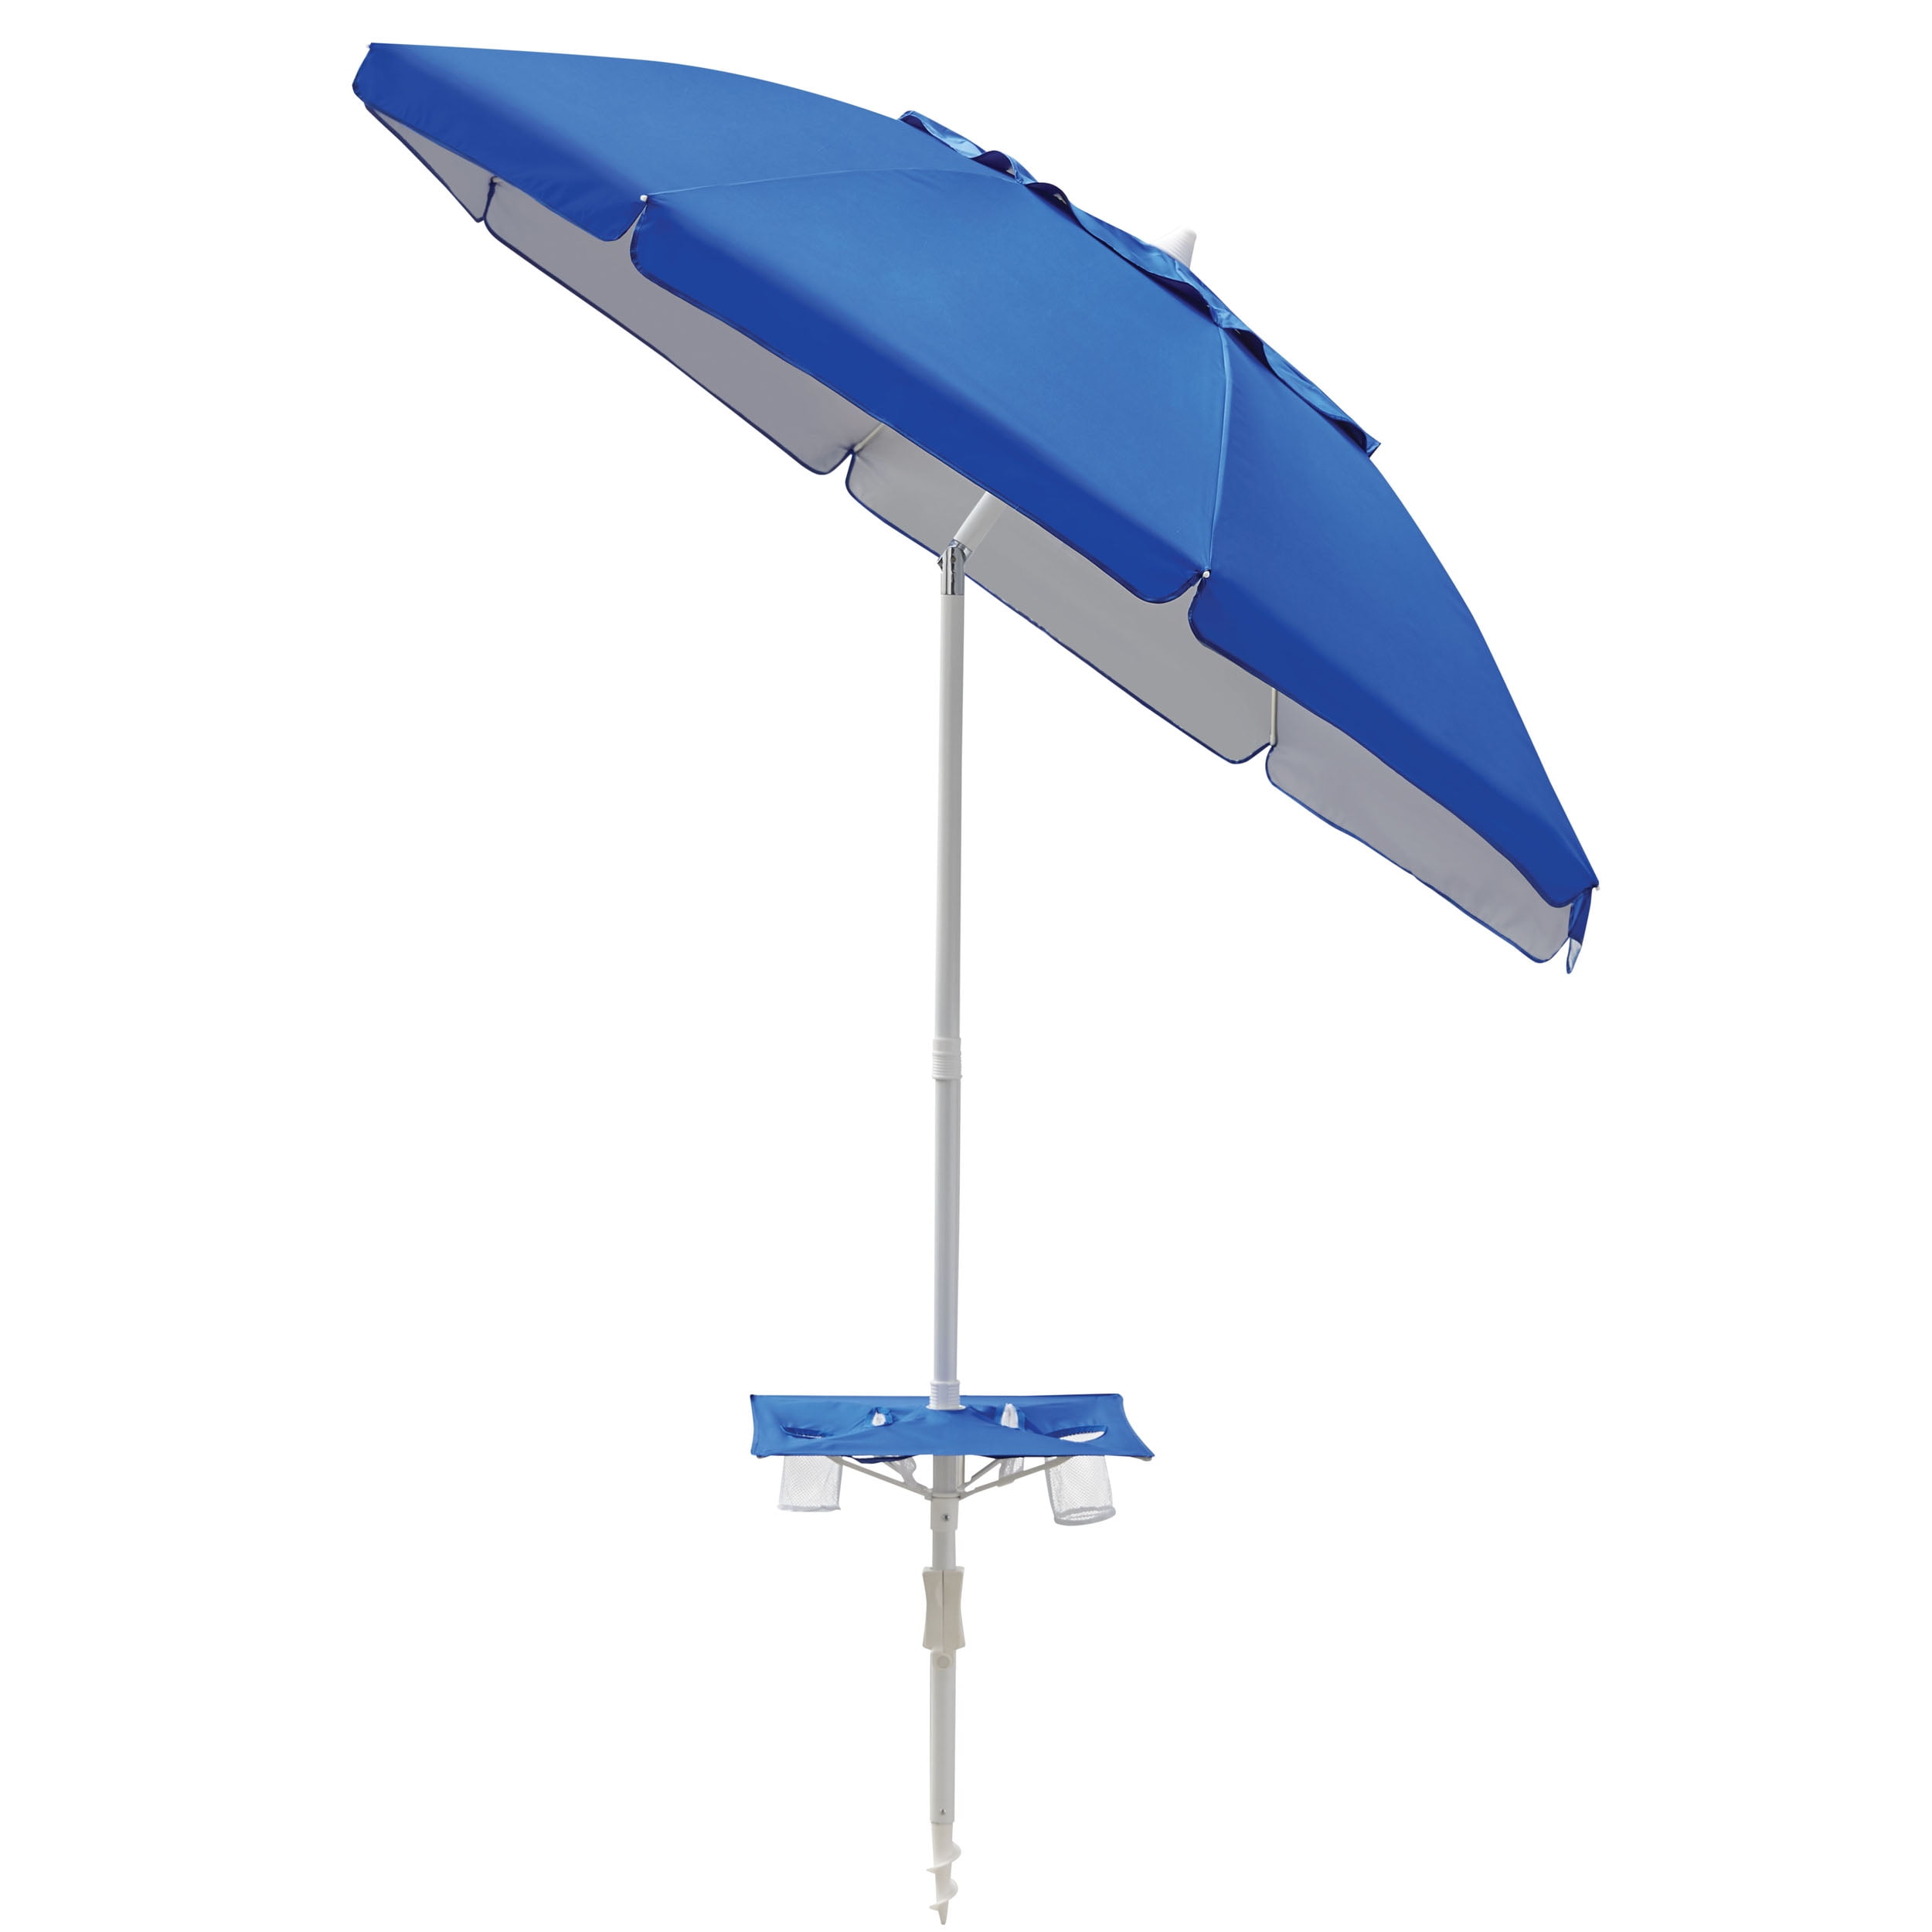 MS 7FT UMBRELLA WITH TABLE